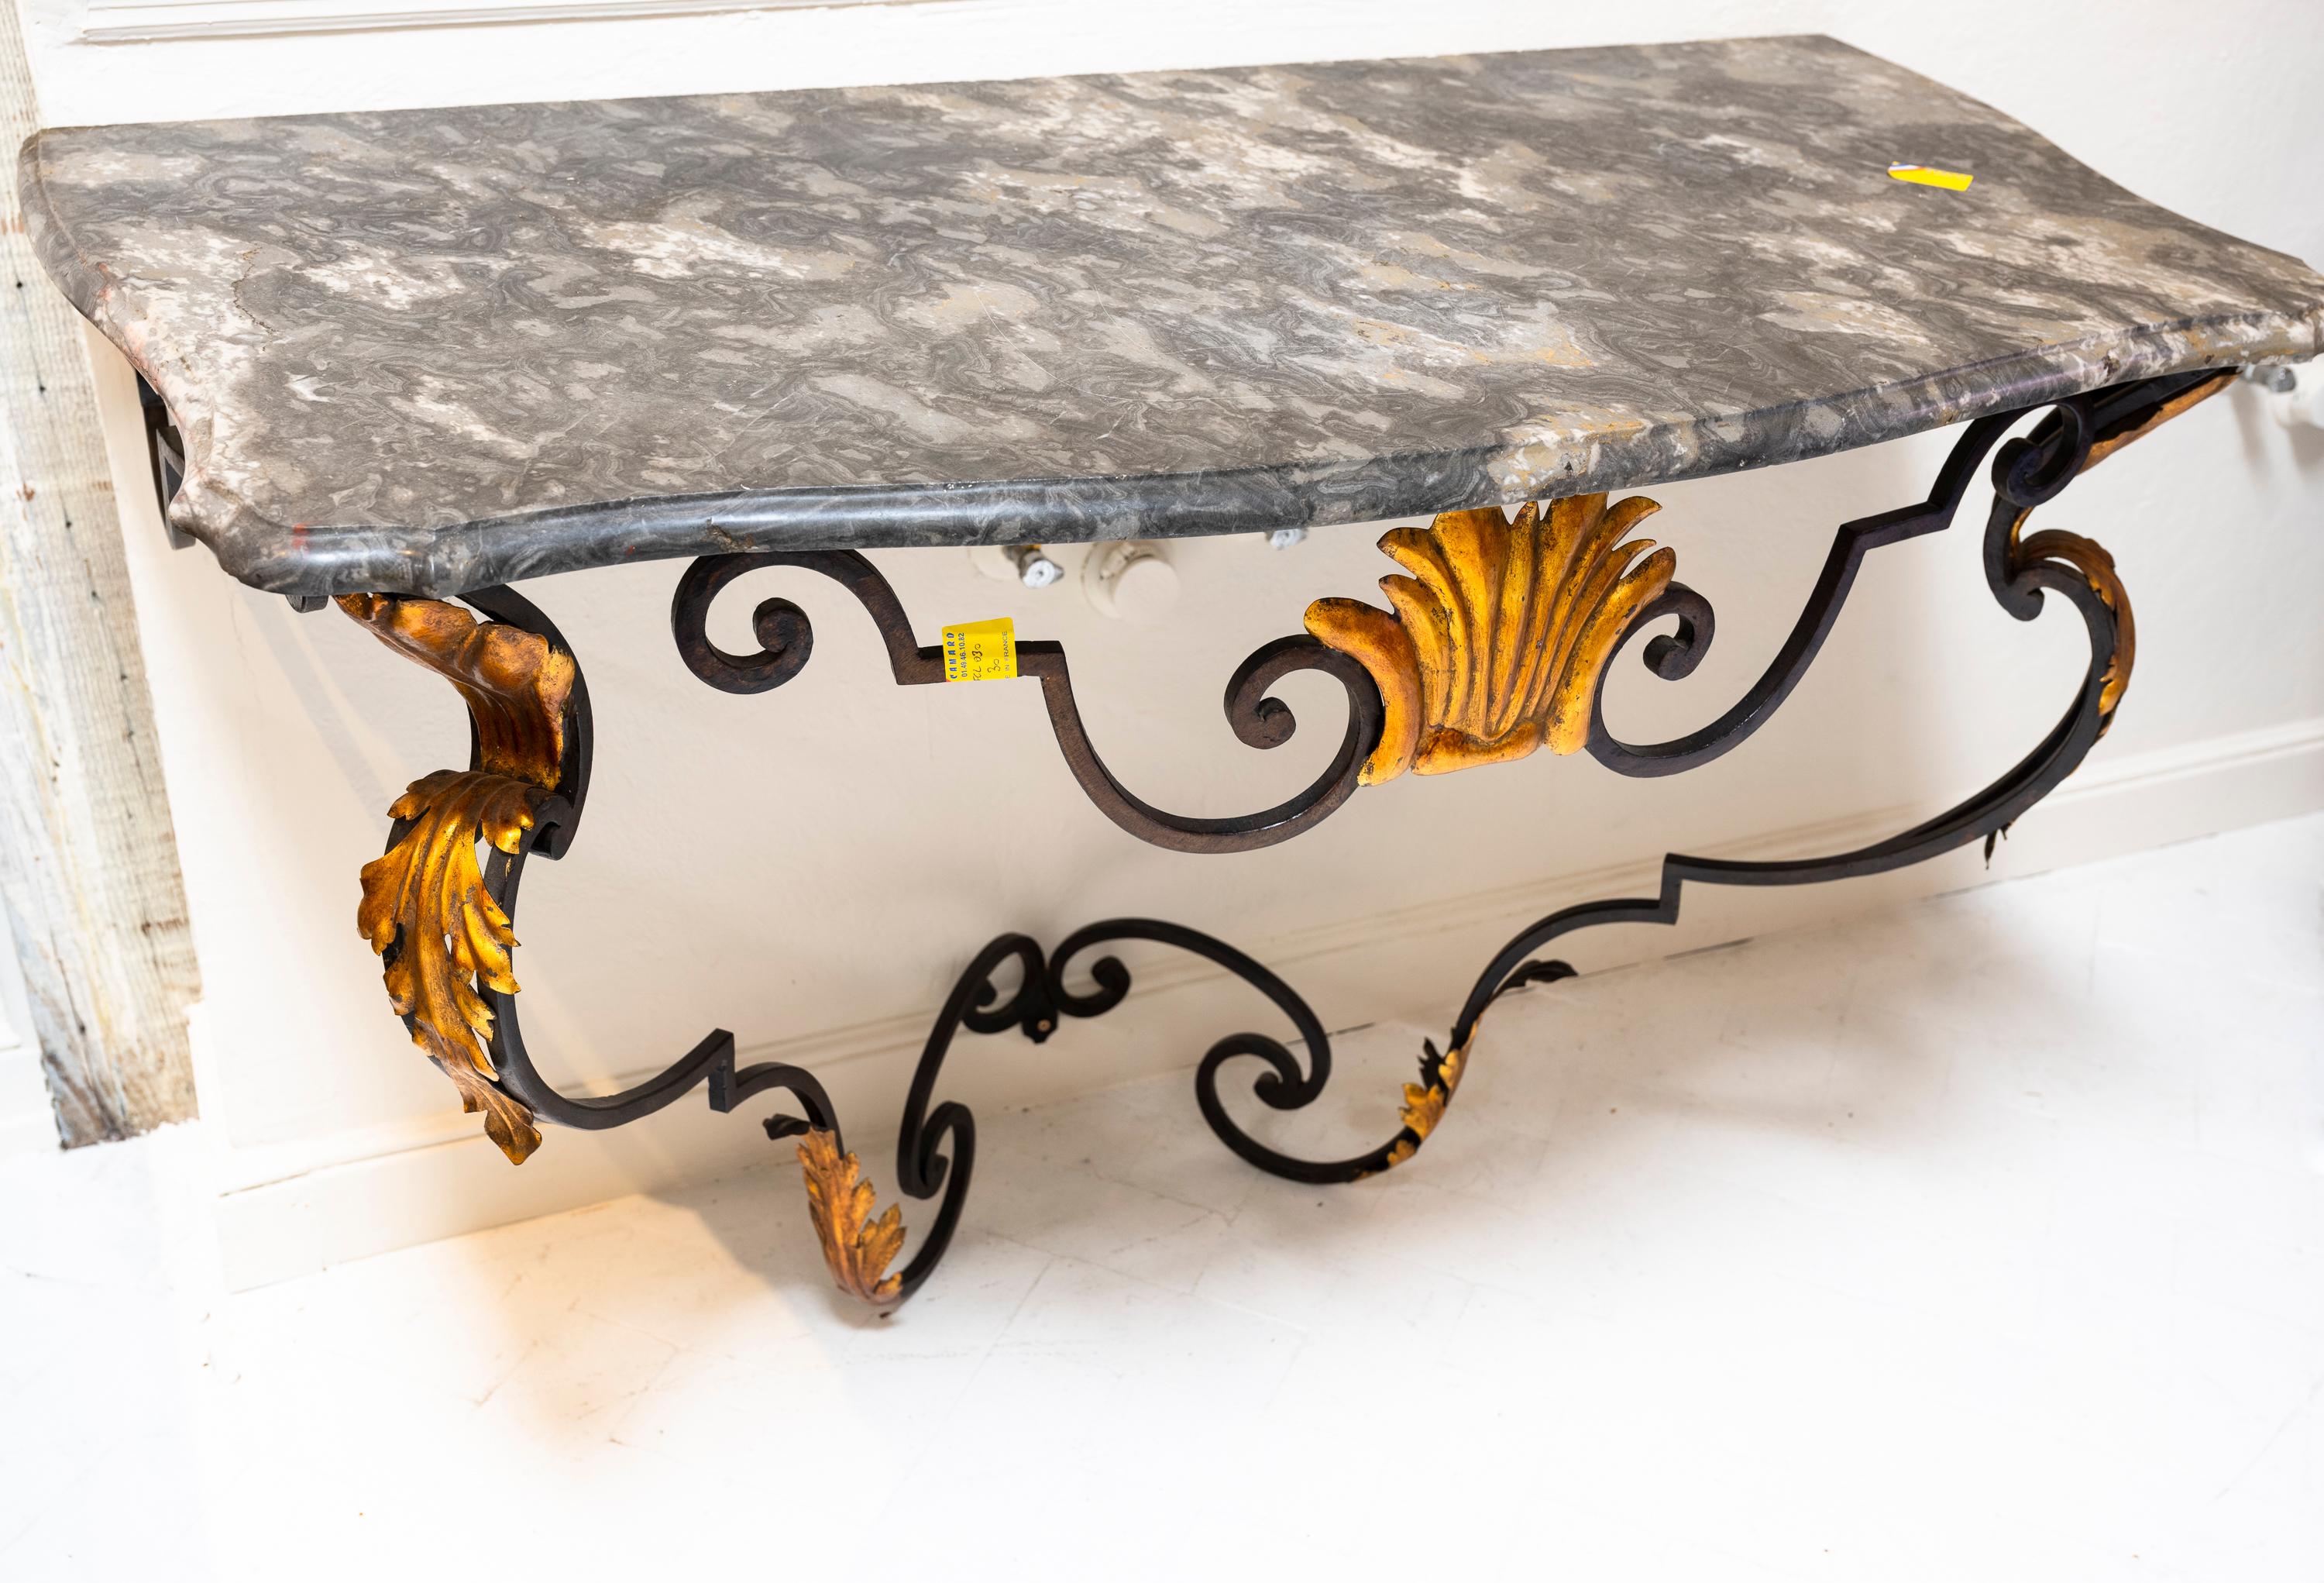 Scrolled Iron Marble Top Console (c. 1860). Simultaneously substantial and airy, this iron table with gold leaf detail is not overwhelming and will make an impact in space of any size. Grey Italian marble top.

Provenance: a private mansion in Old